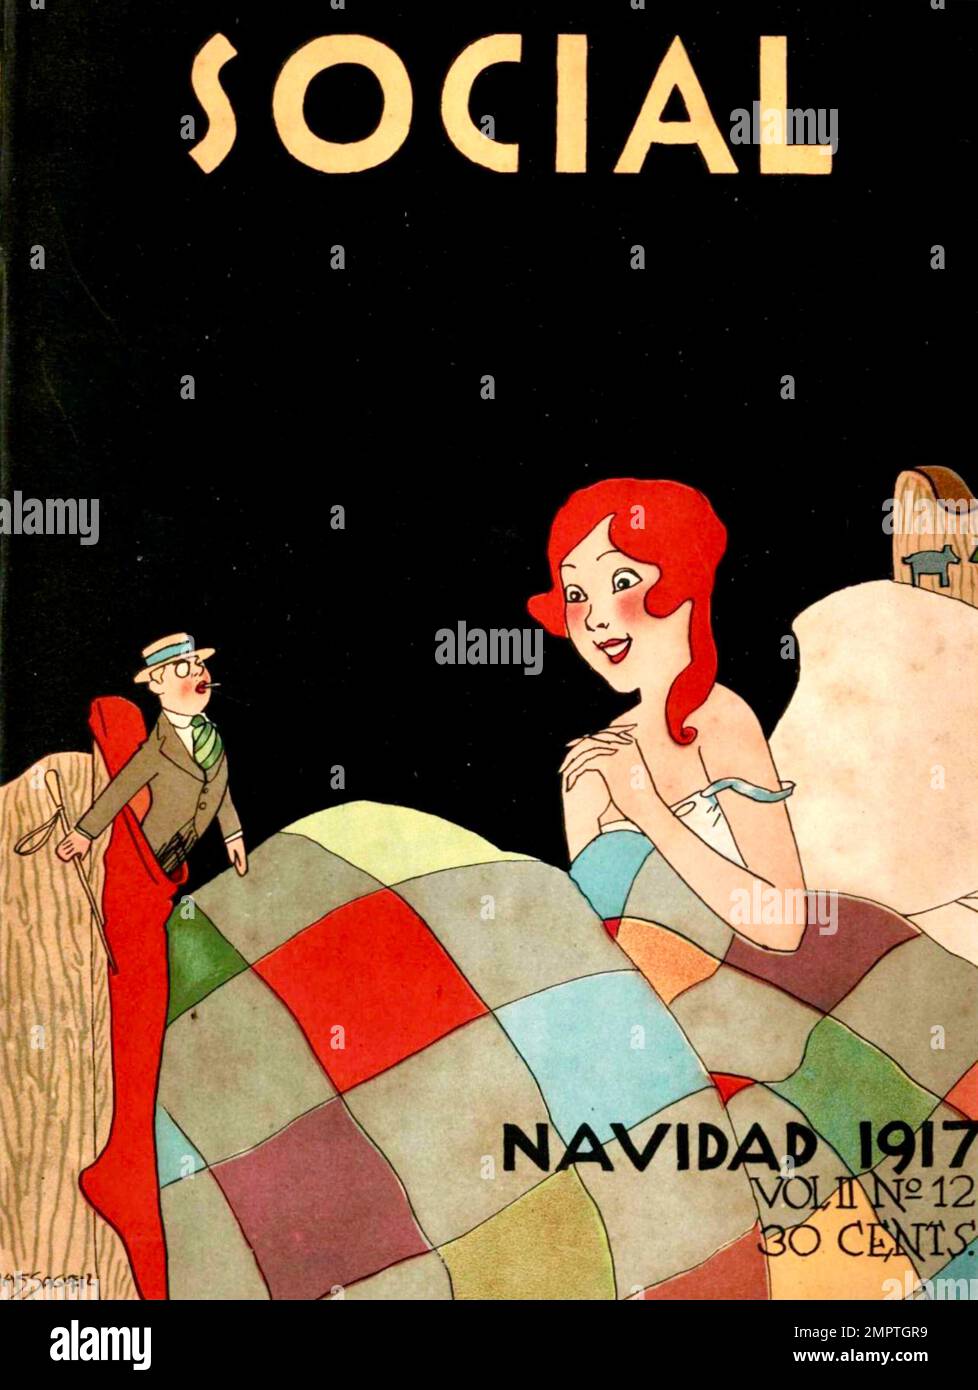 Conrado Walter Massaguer - Cuban Magazine Social Artwork - December 1917 edition - A little man appears at the end of a woman's bed. Stock Photo